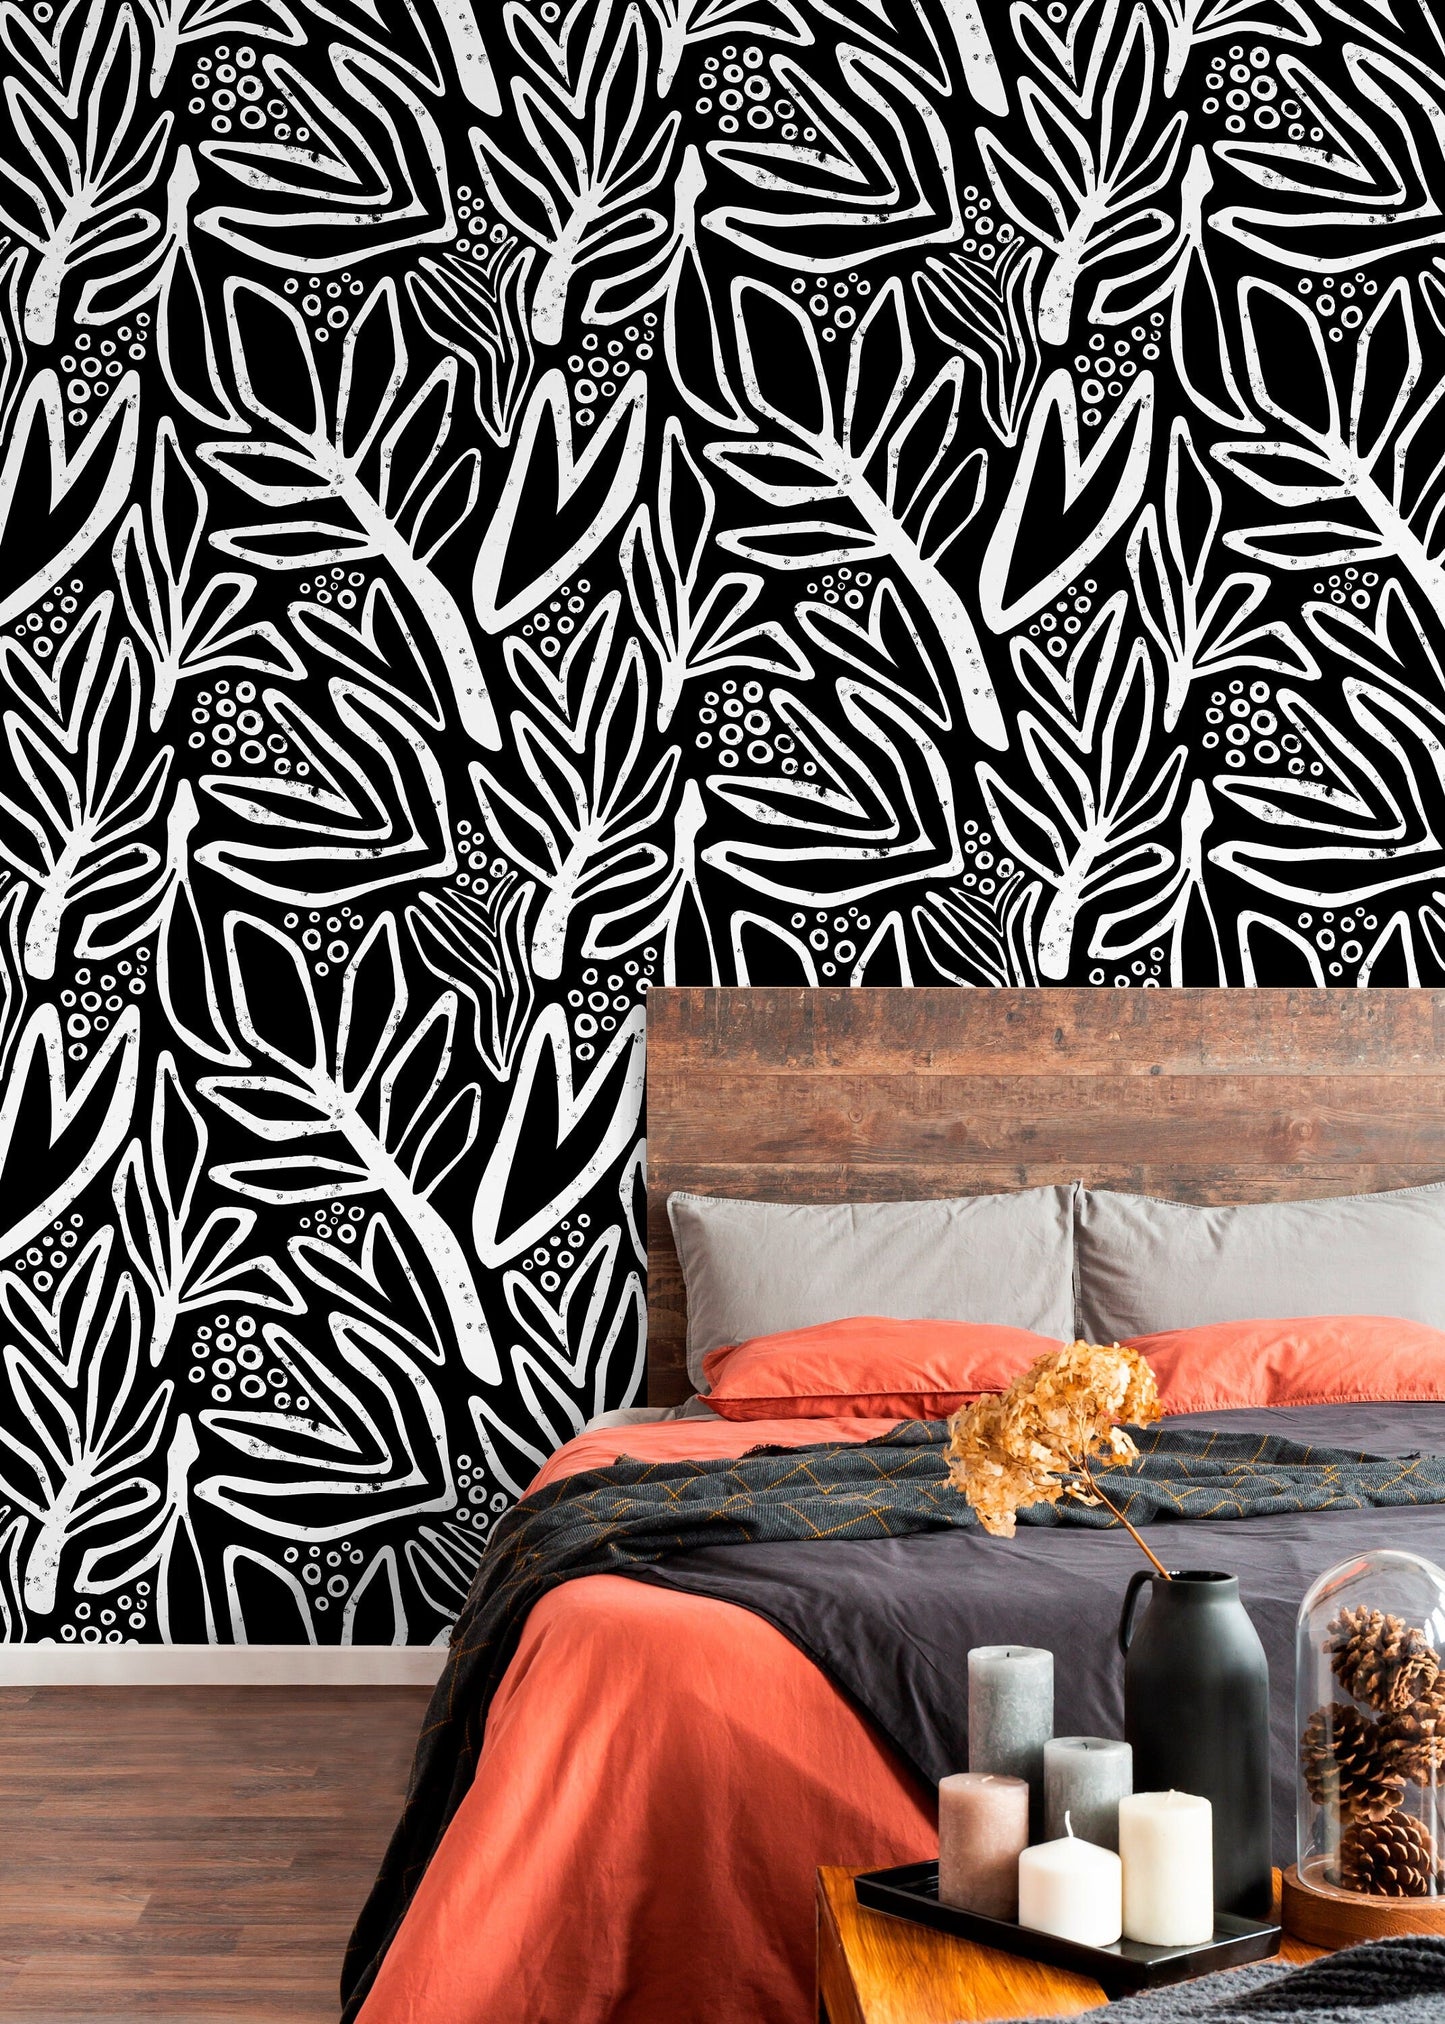 Wallpaper Peel and Stick Wallpaper Removable Wallpaper Home Decor Wall Art Wall Decor Room Decor / Black Abstract Leaf Wallpaper - X176